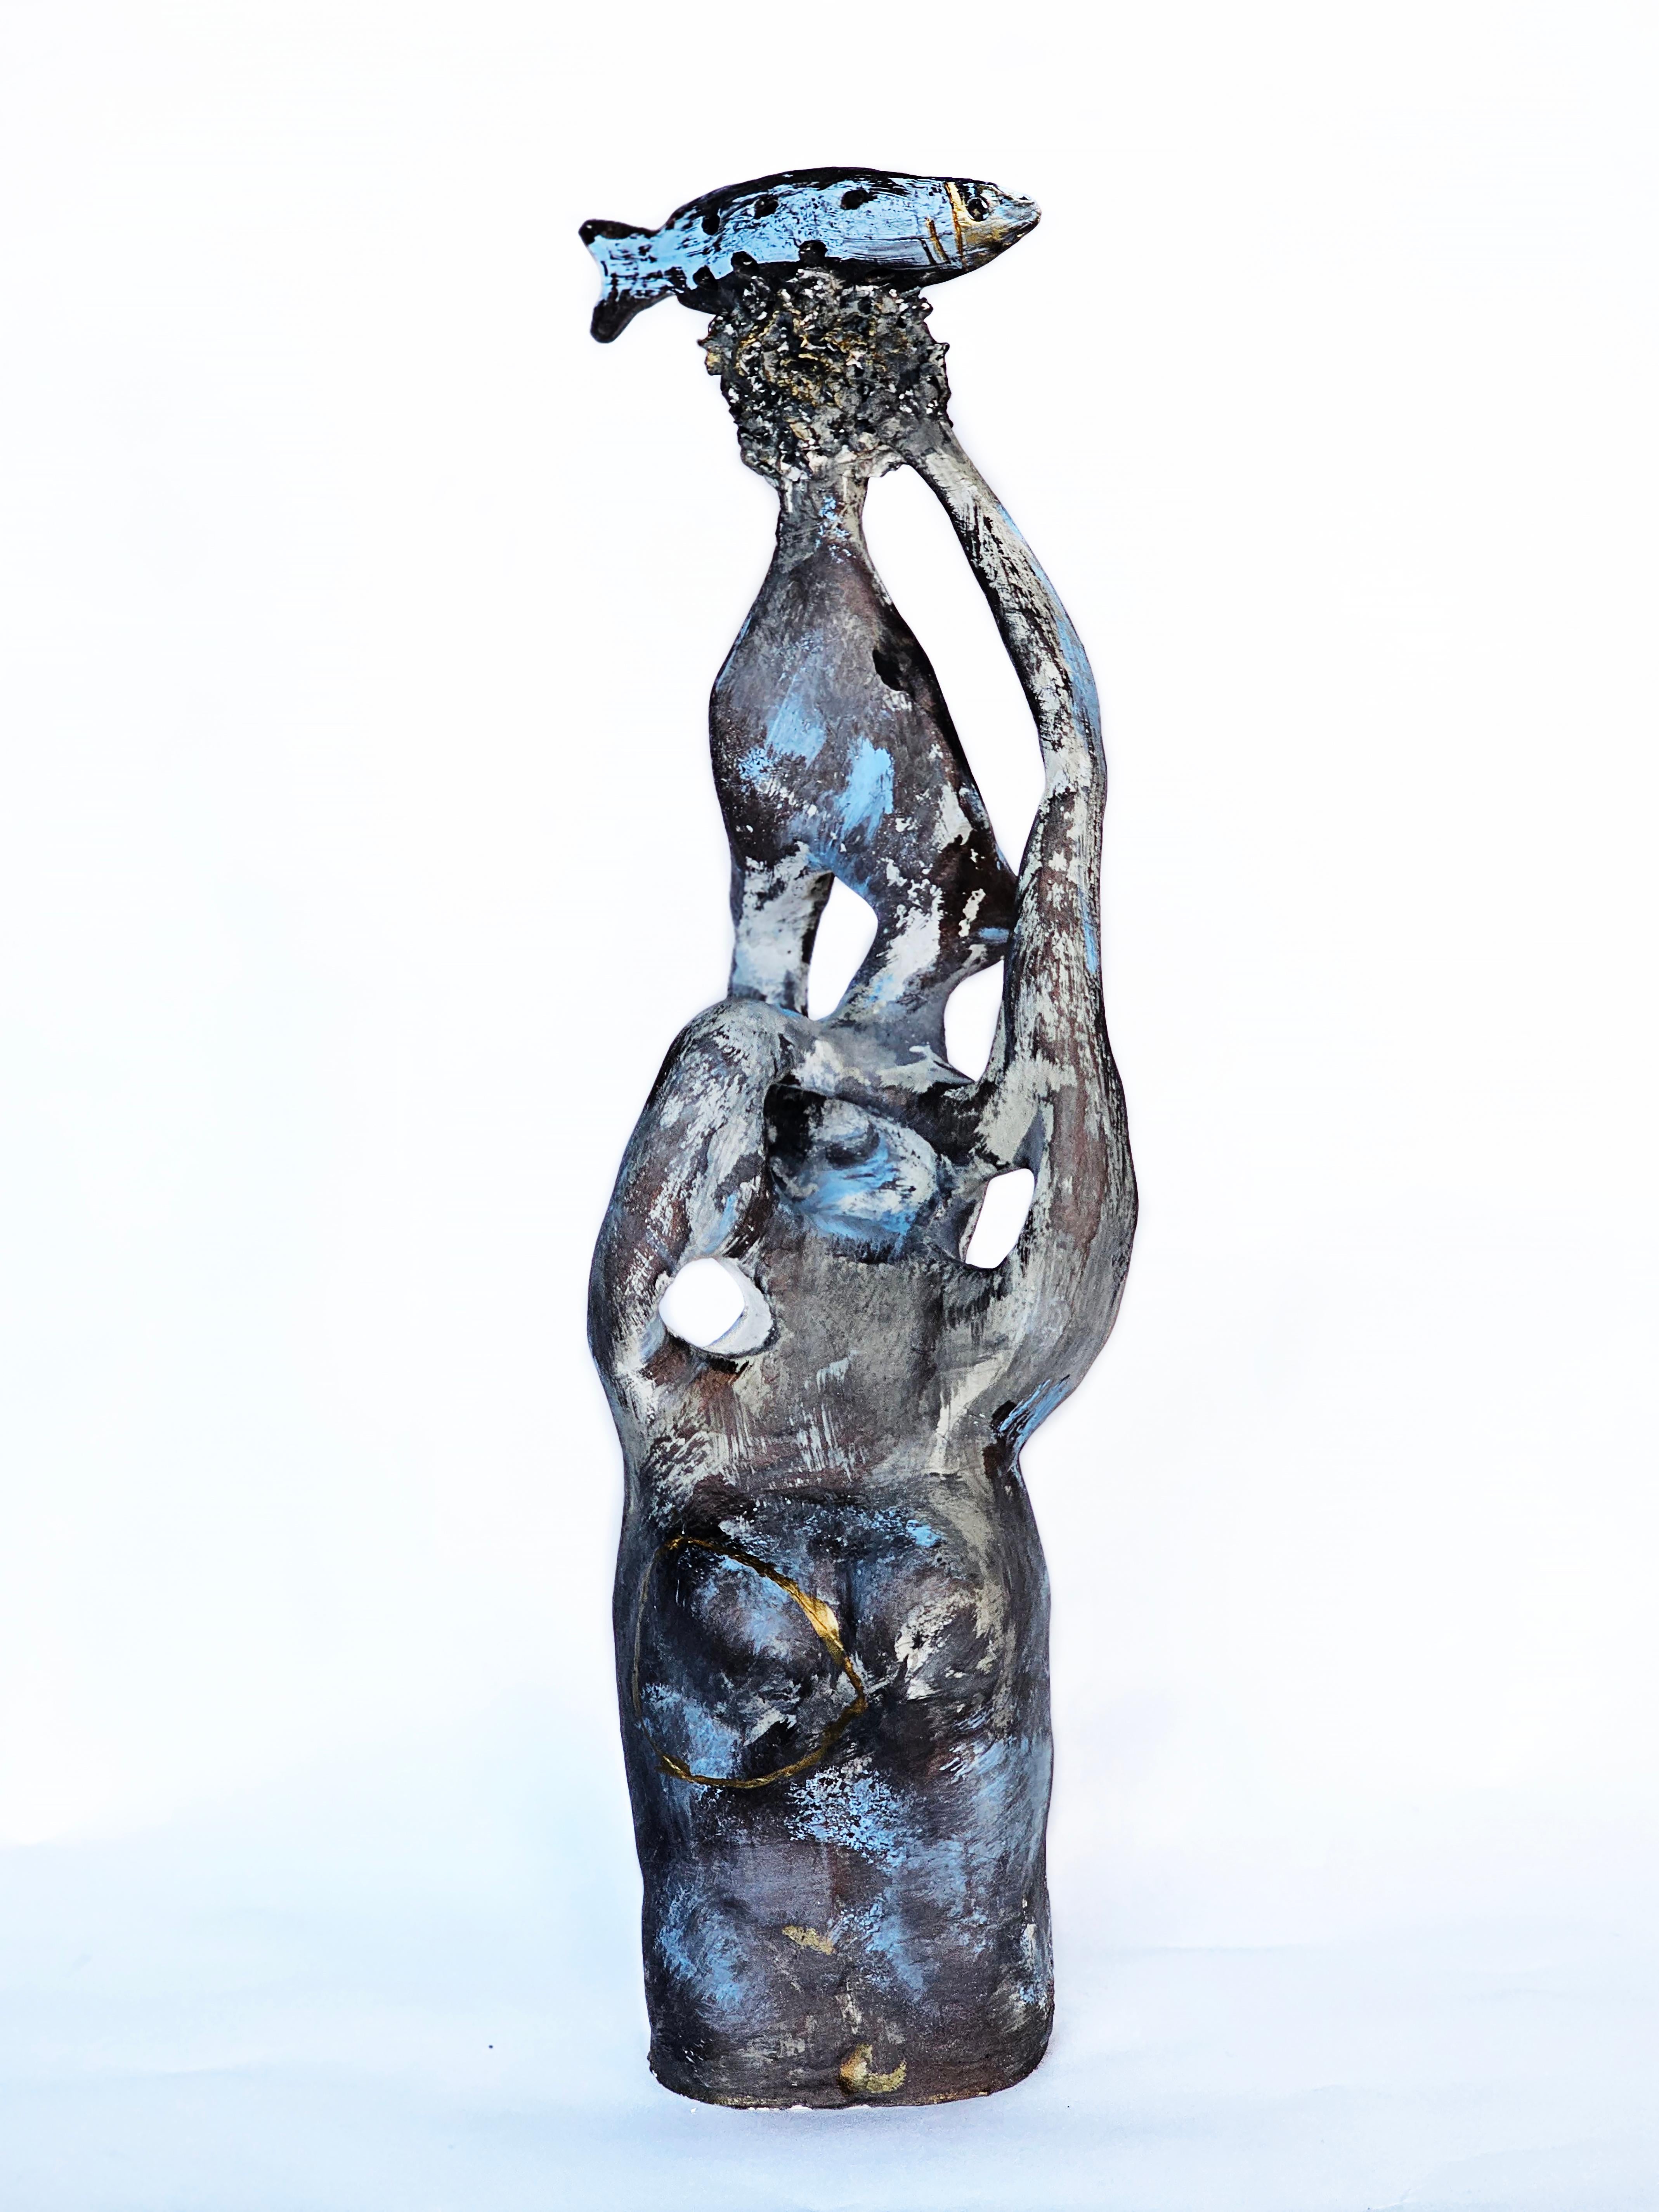 "Zuza" Ceramic Sculpture 22" x 6" inch by Lika Brutyan

Medium: Clay, underglaze

Lika Brutyan is American photographer, was born in a family of scientists and artists in Yerevan, Armenia. 
Her training and work in psychotherapy has lead her to a